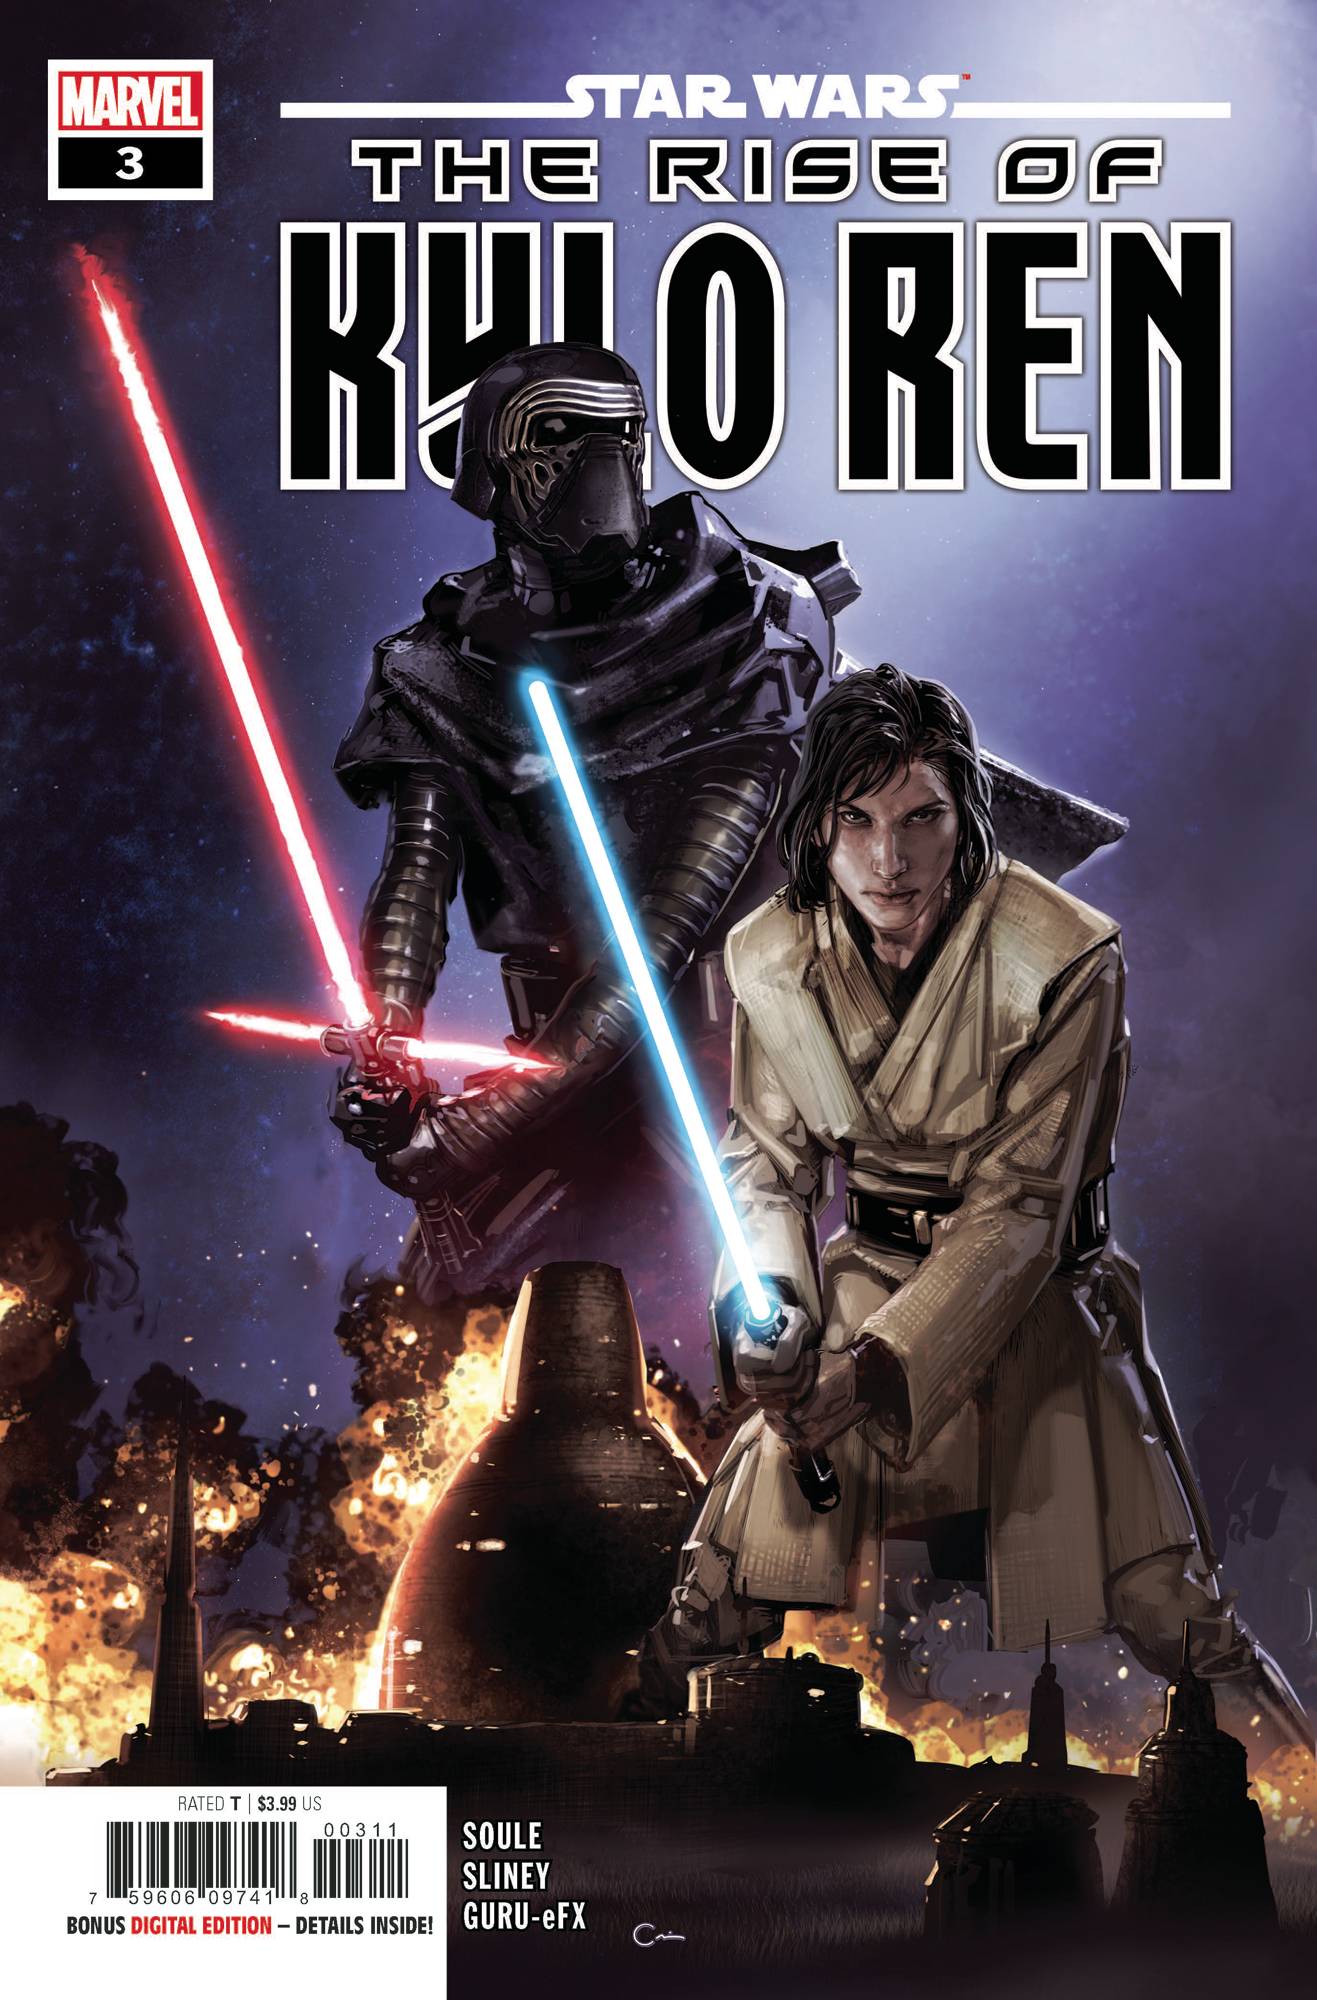 STAR WARS RISE KYLO REN #3 (OF 4) 1ST APPEARANCE OF AVAR KRISS (HIGH REPUBLIC)